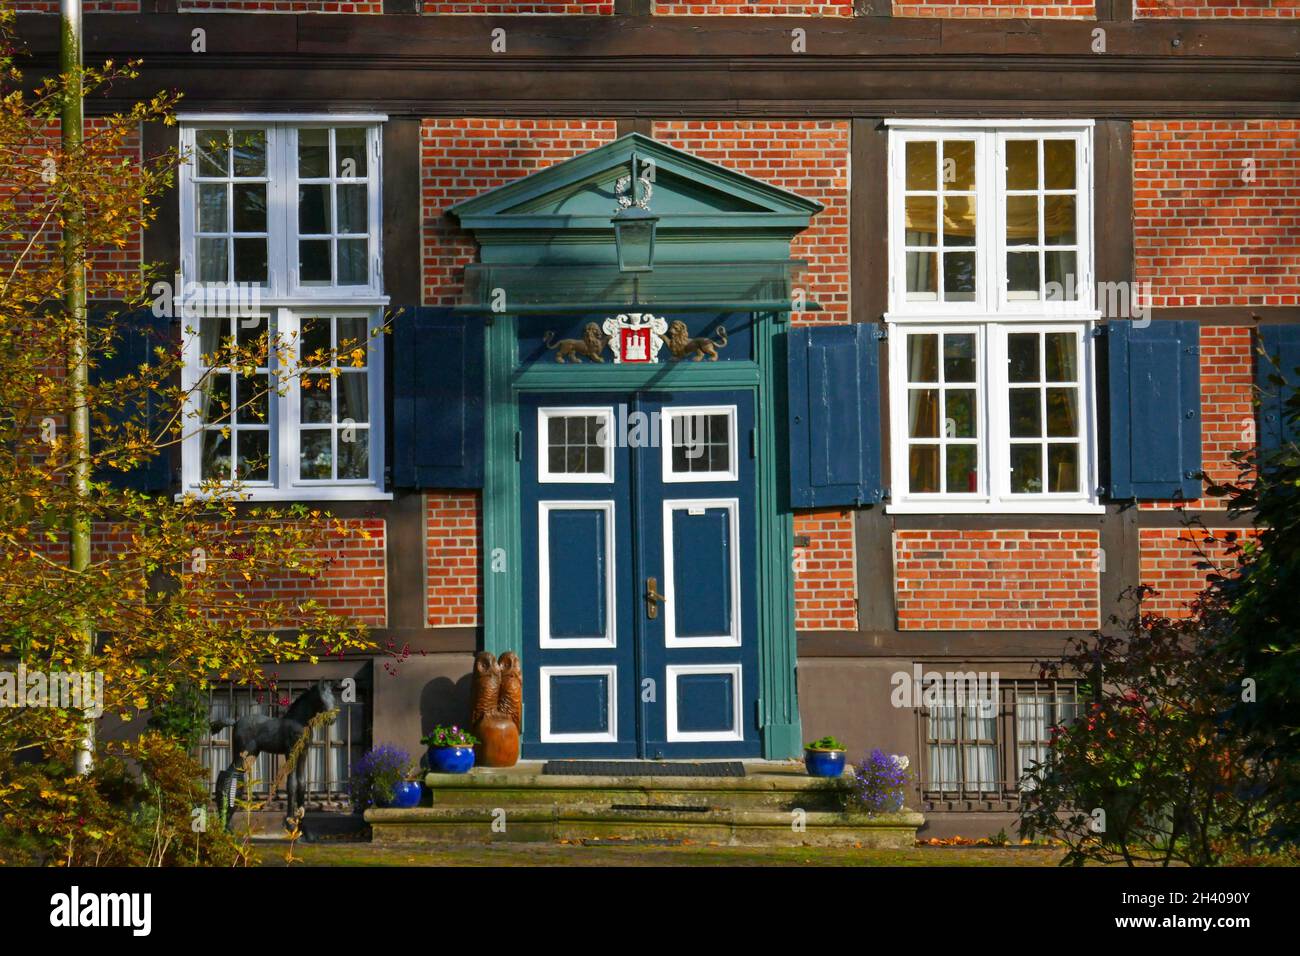 Wohldorf mansion from 1714 Stock Photo